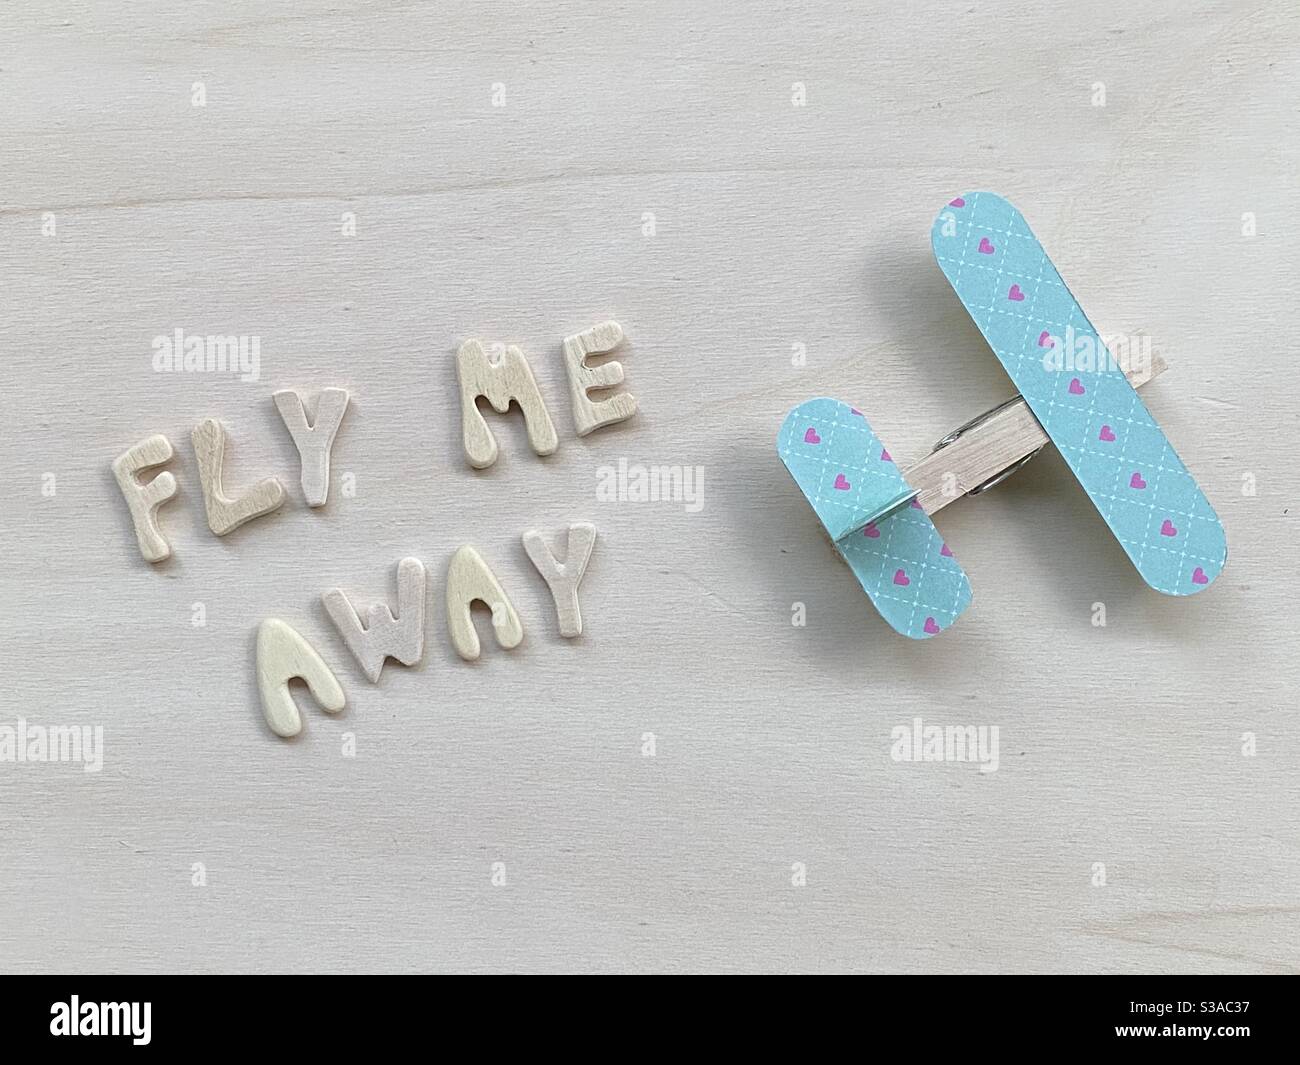 Fly me away, creative text composed with wooden letters and a wooden clothespin airplane Stock Photo